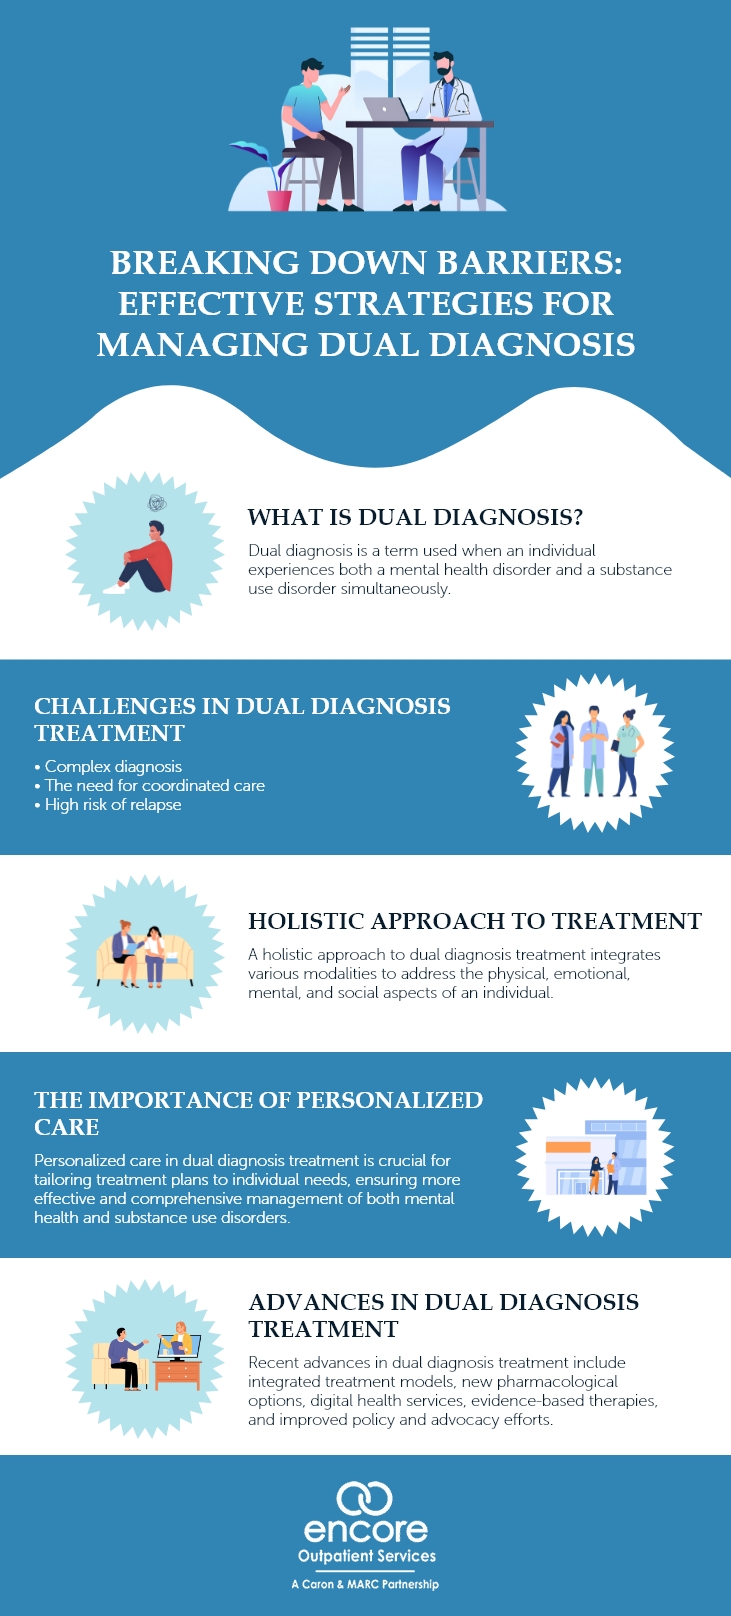 Breaking Down Barriers Effective Strategies for Managing Dual Diagnosis